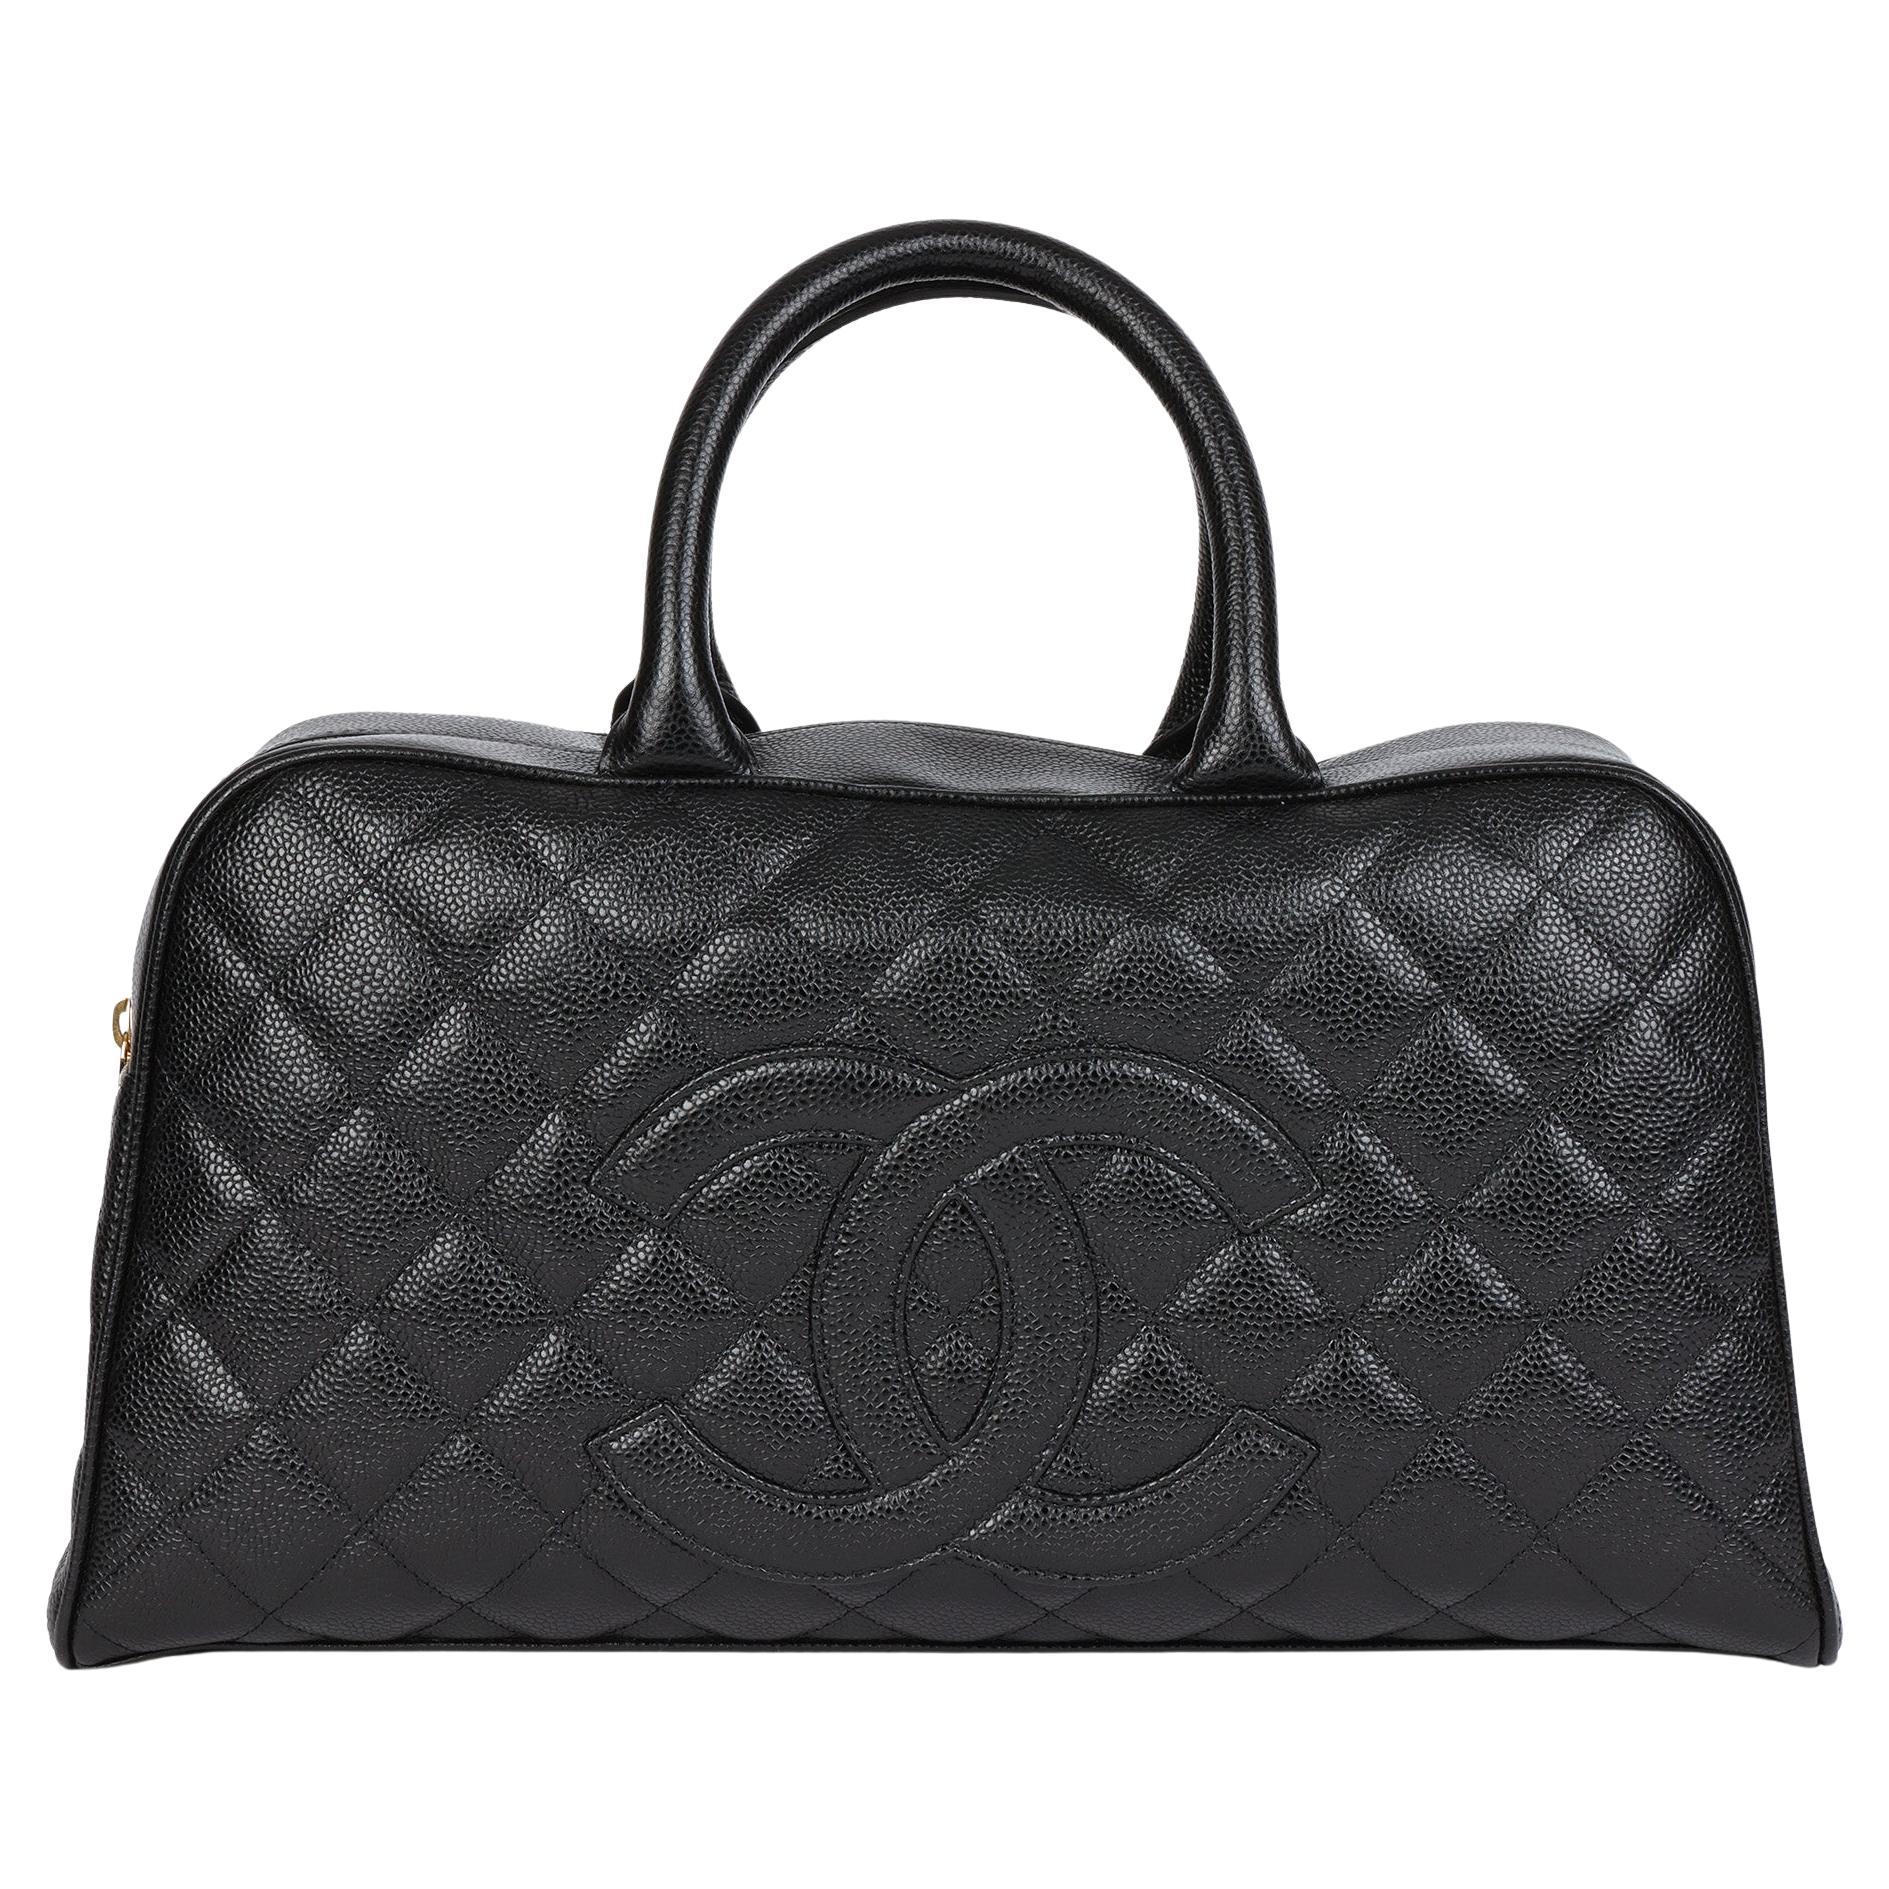 CHANEL Black Quilted Caviar Leather Boston